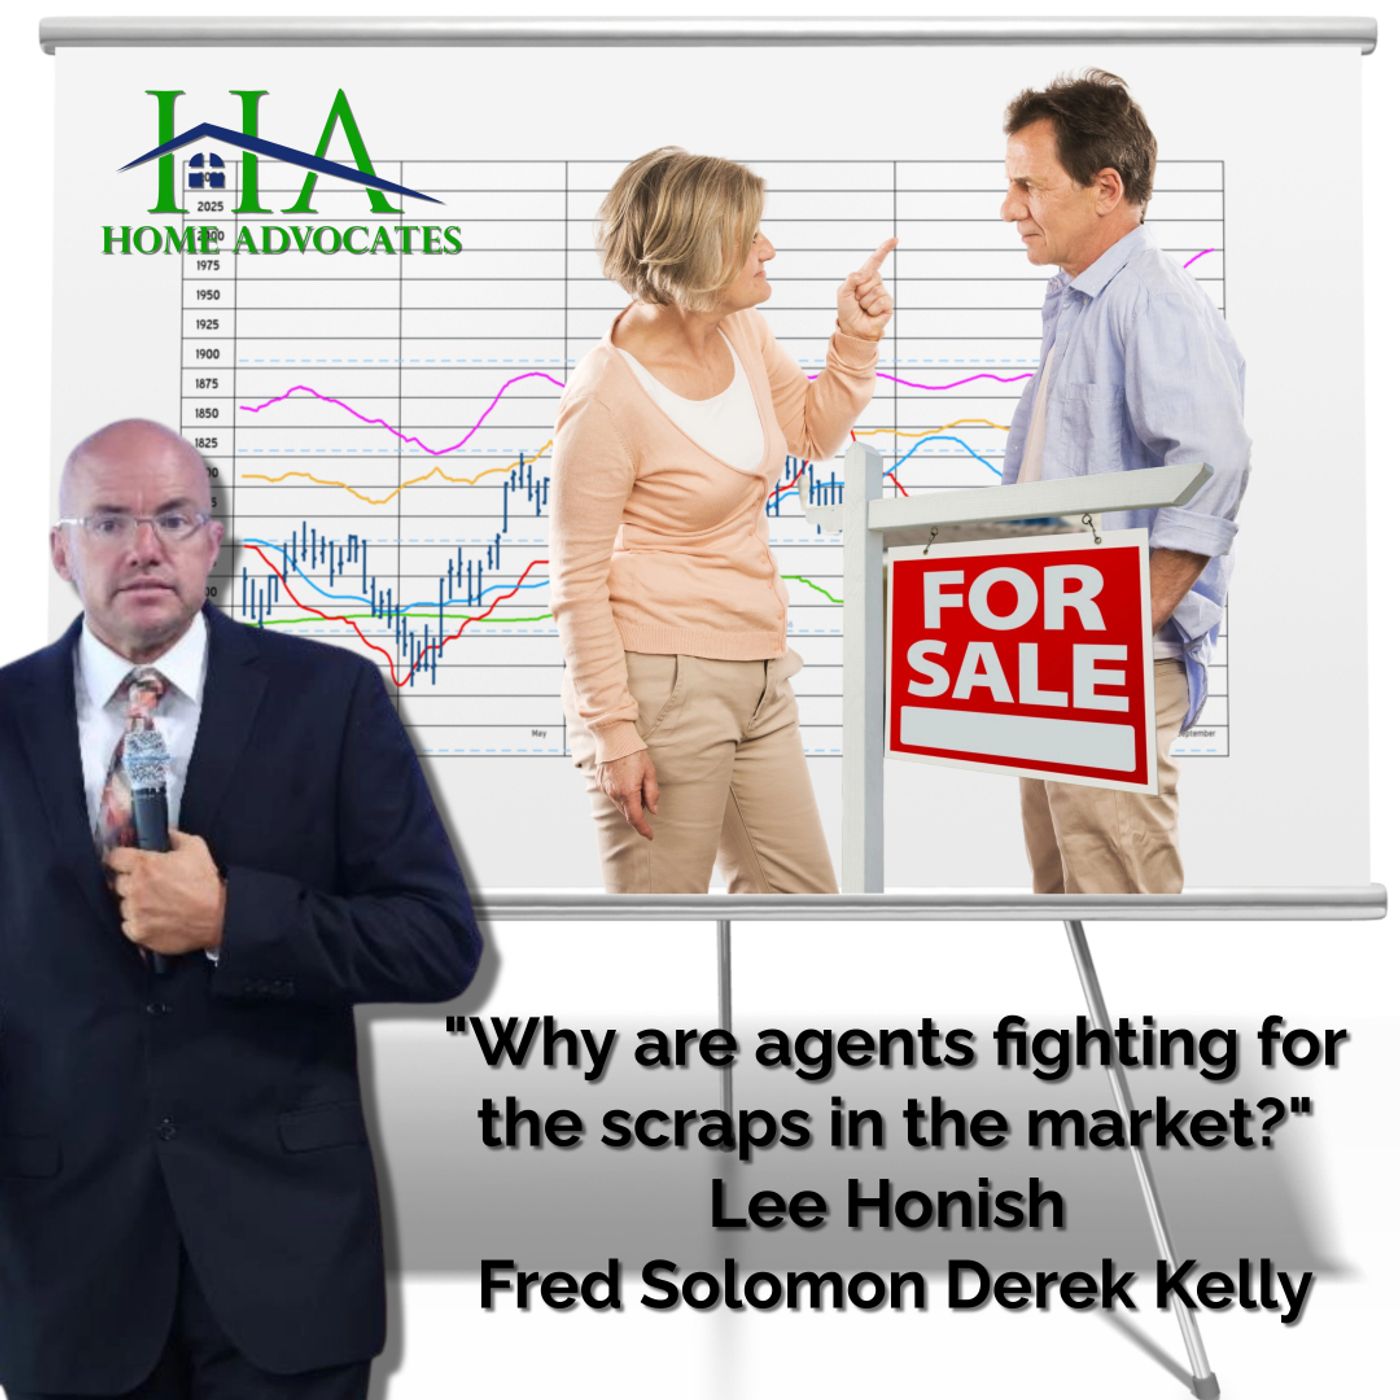 "Why are agents fighting for the scraps in the market?" Lee Honish | Fred Solomon | Derek Kelly